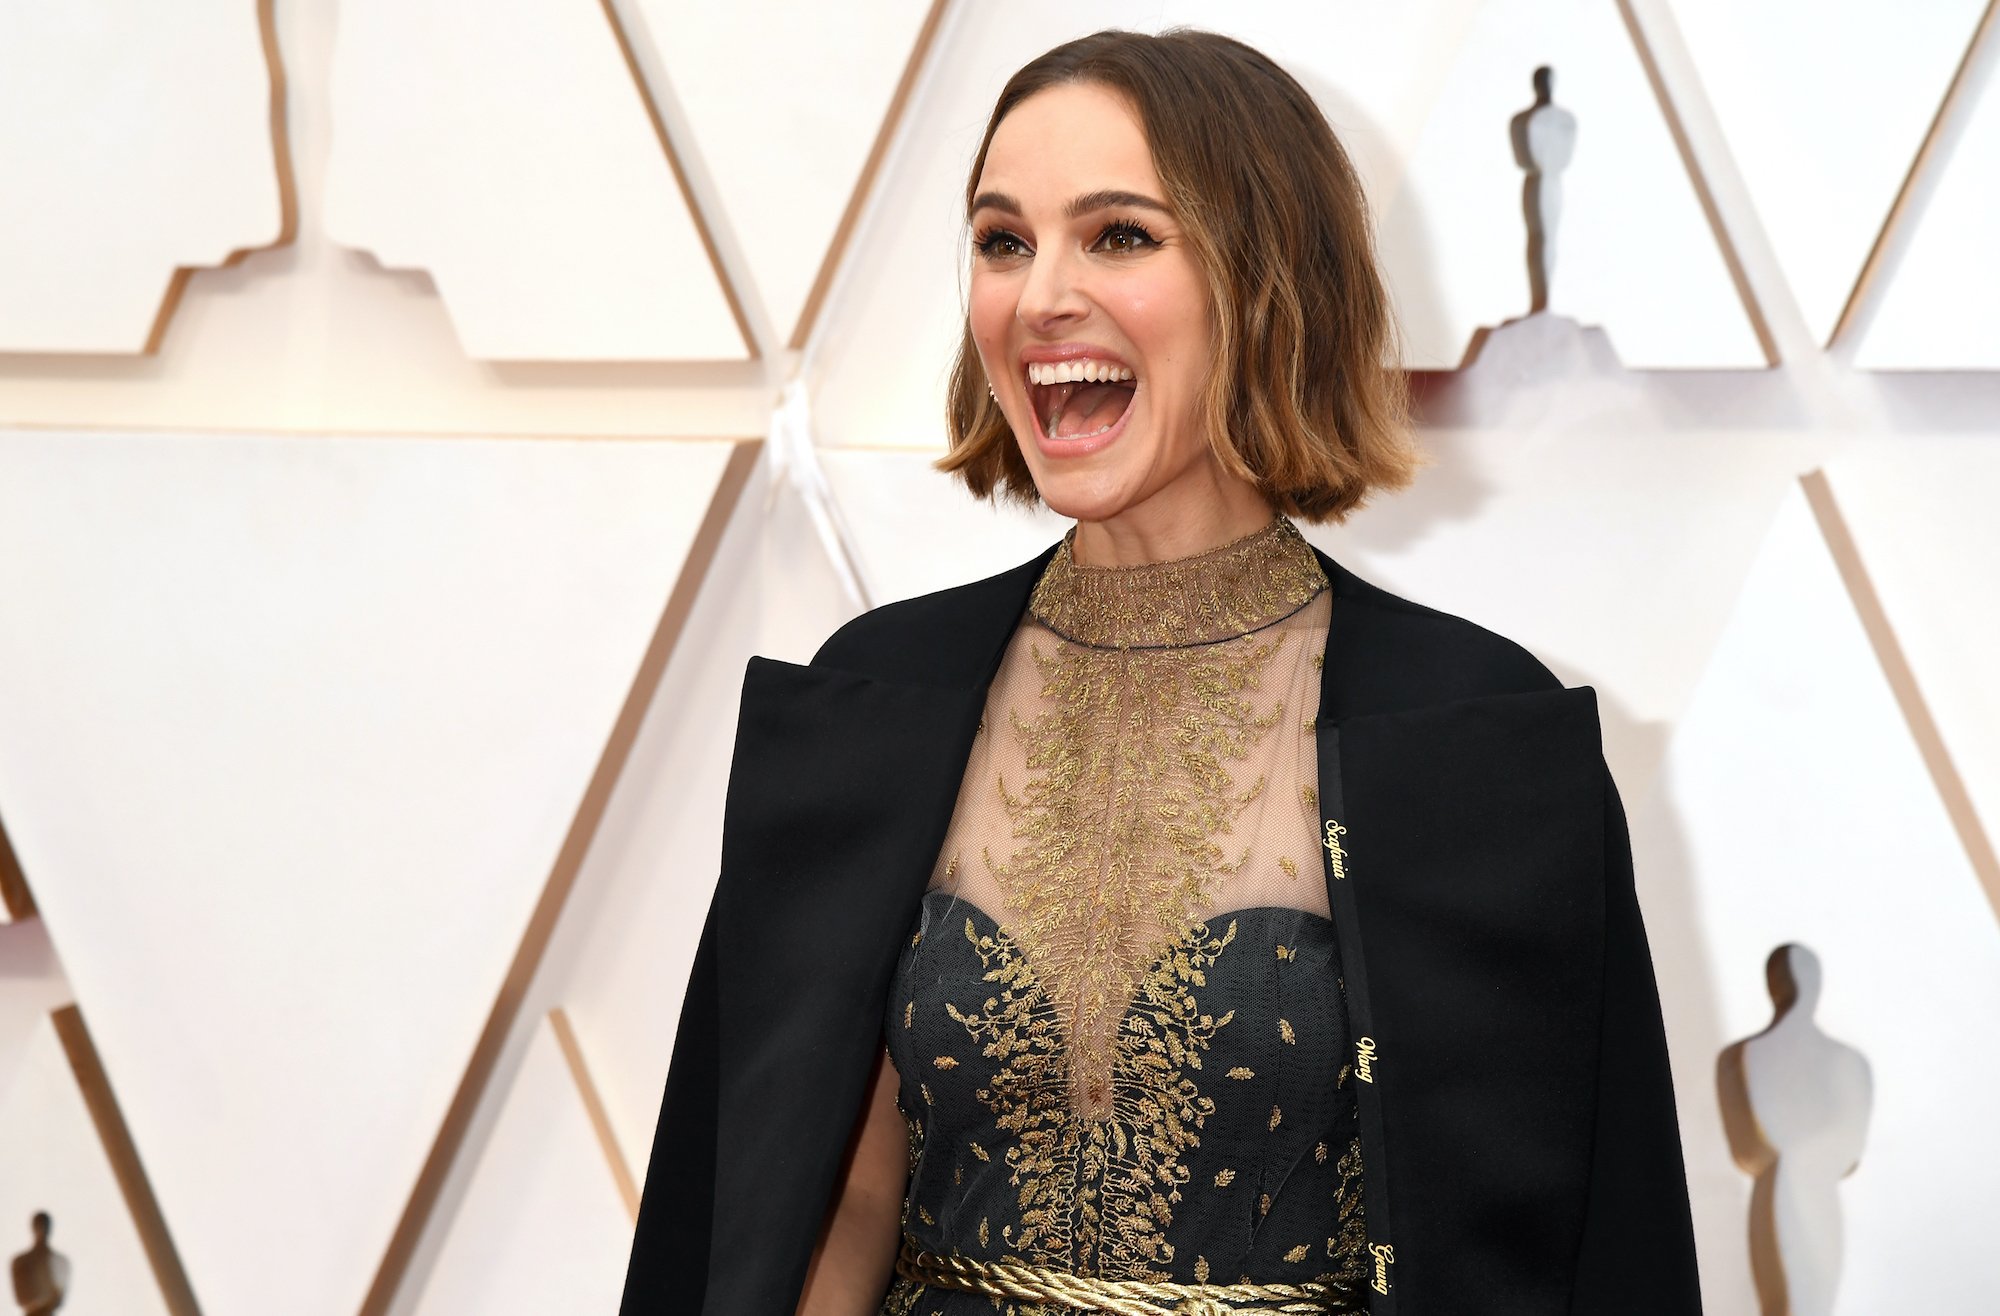 Natalie Portman laughing in front of a white background